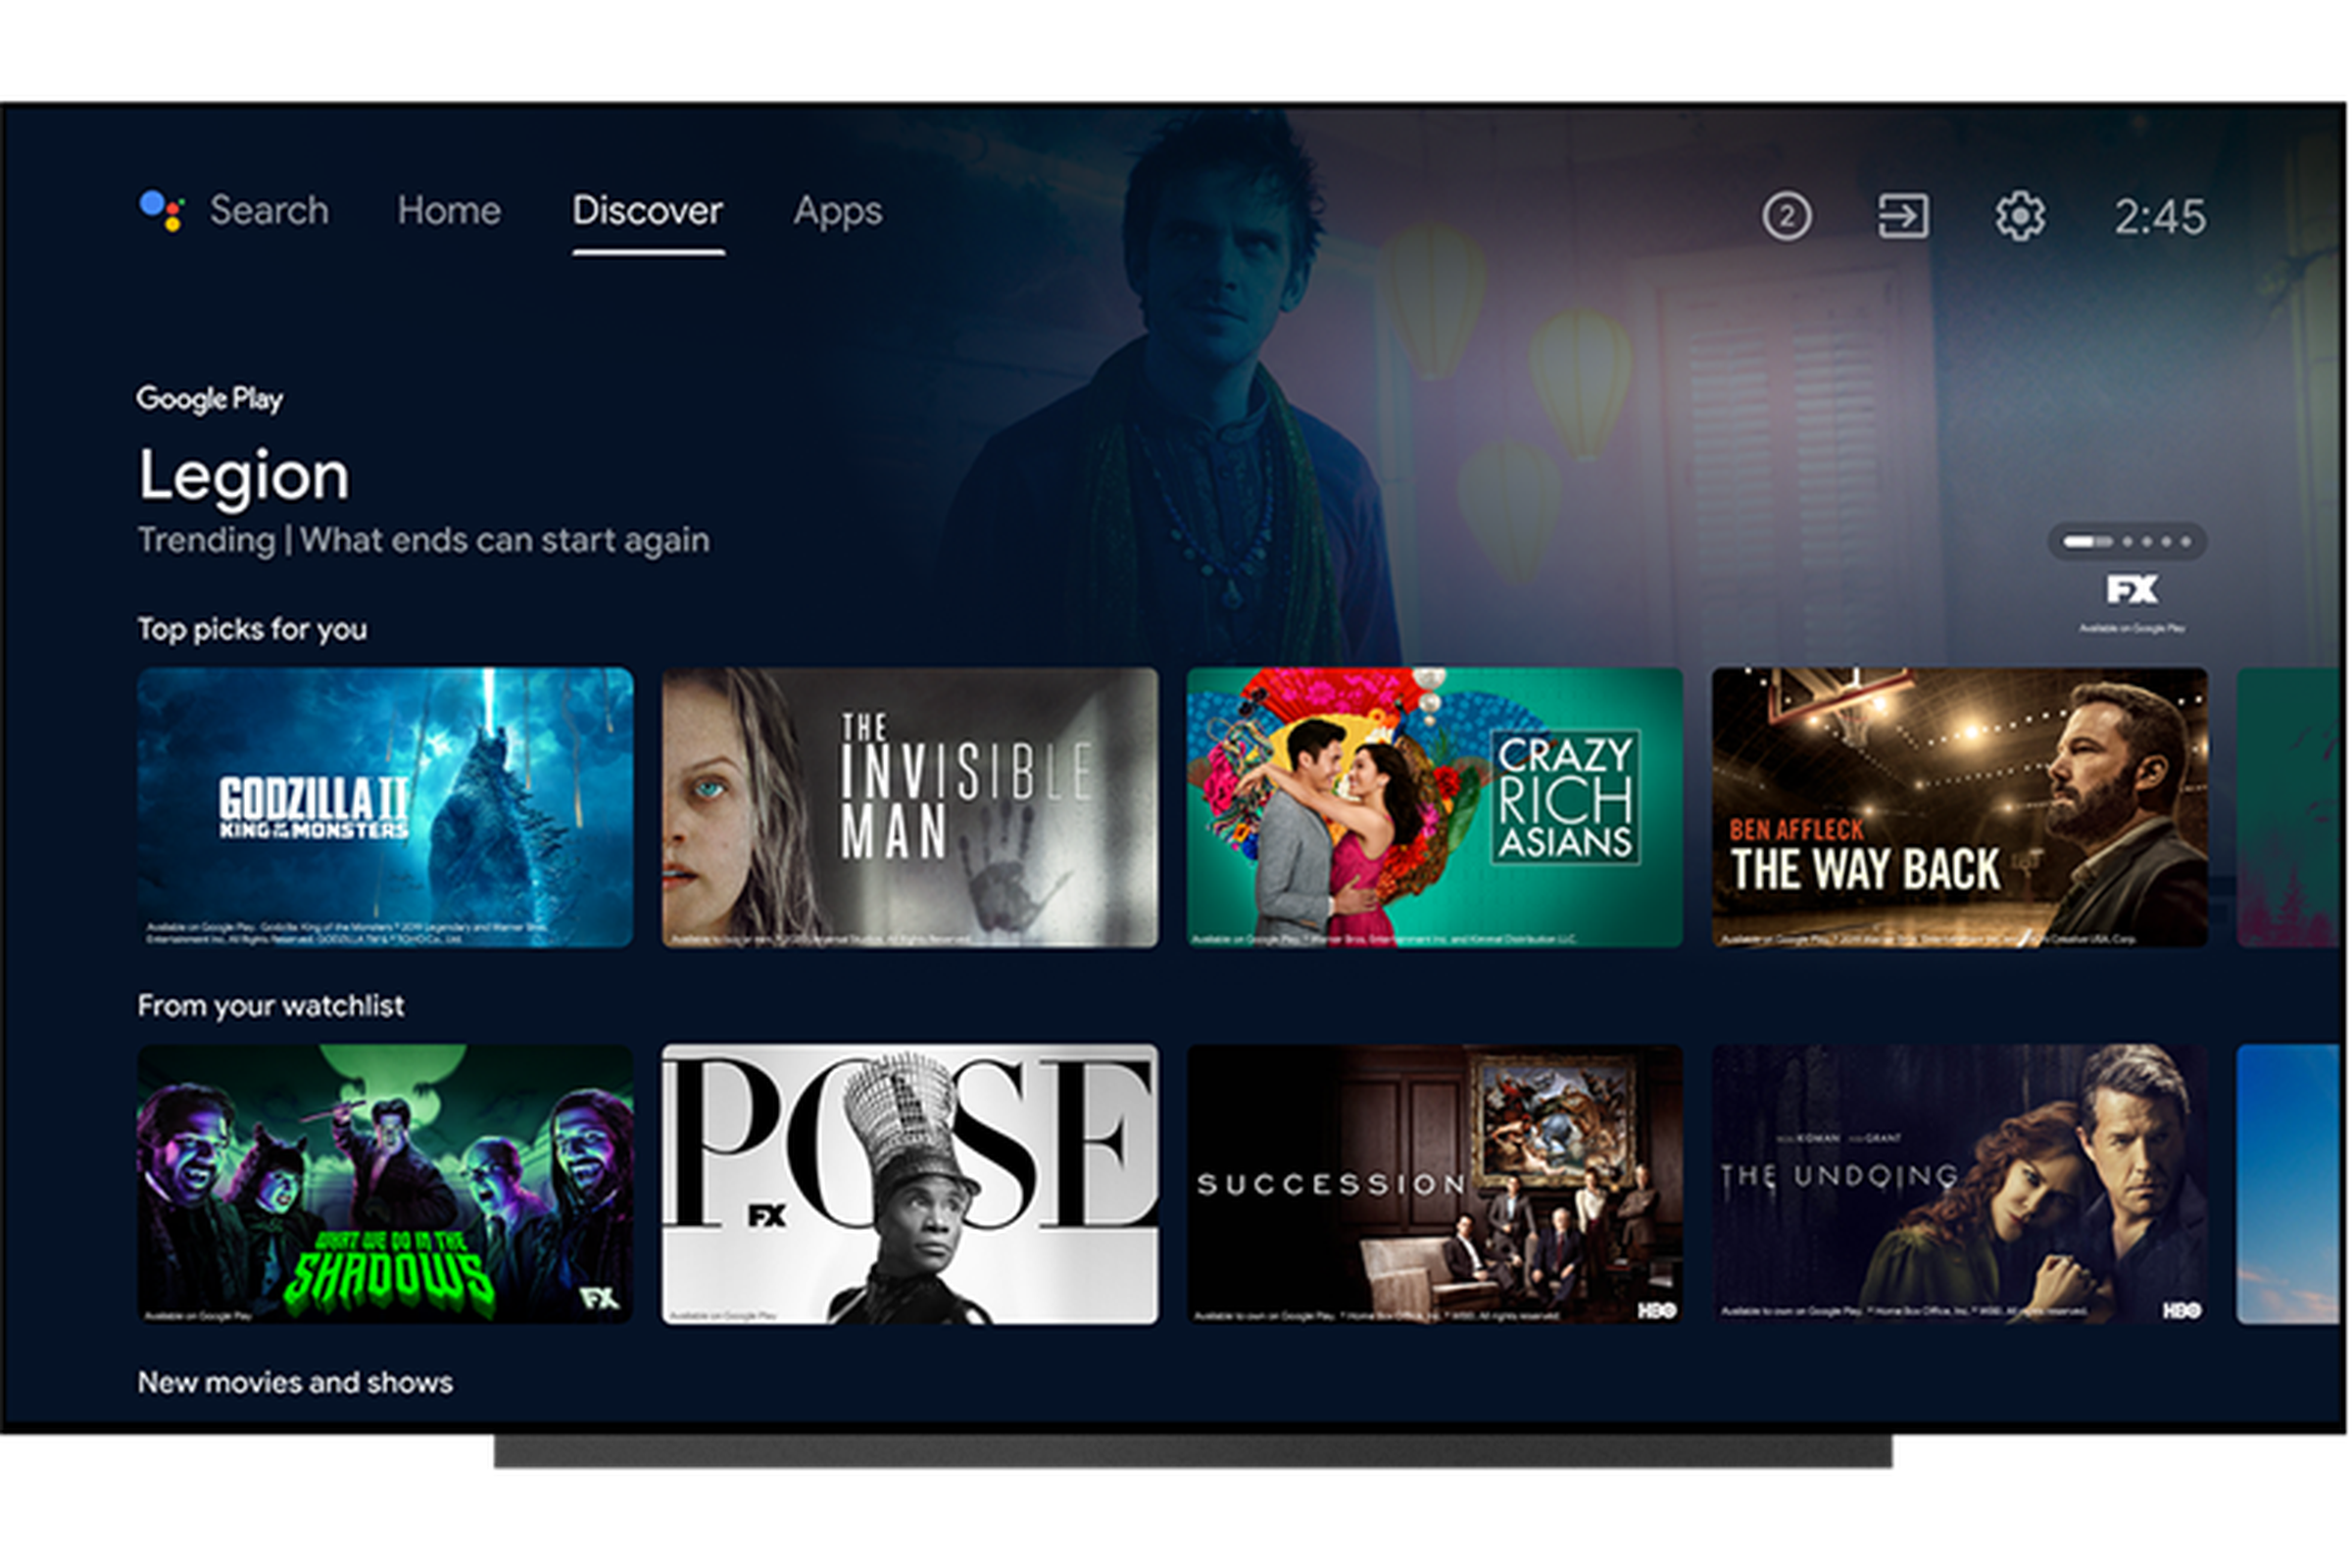 Android TV is finally getting a watchlist.